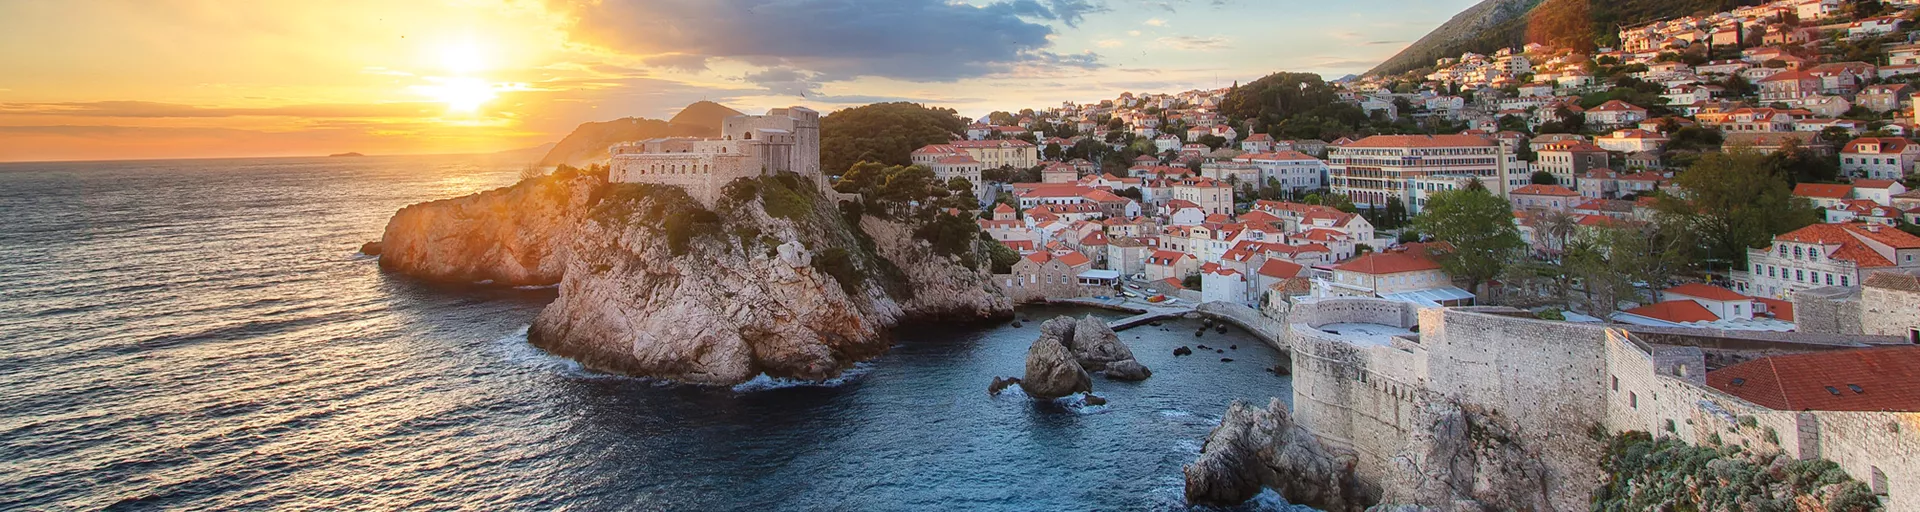 Croatia Luxury Tours and Travel Guide 